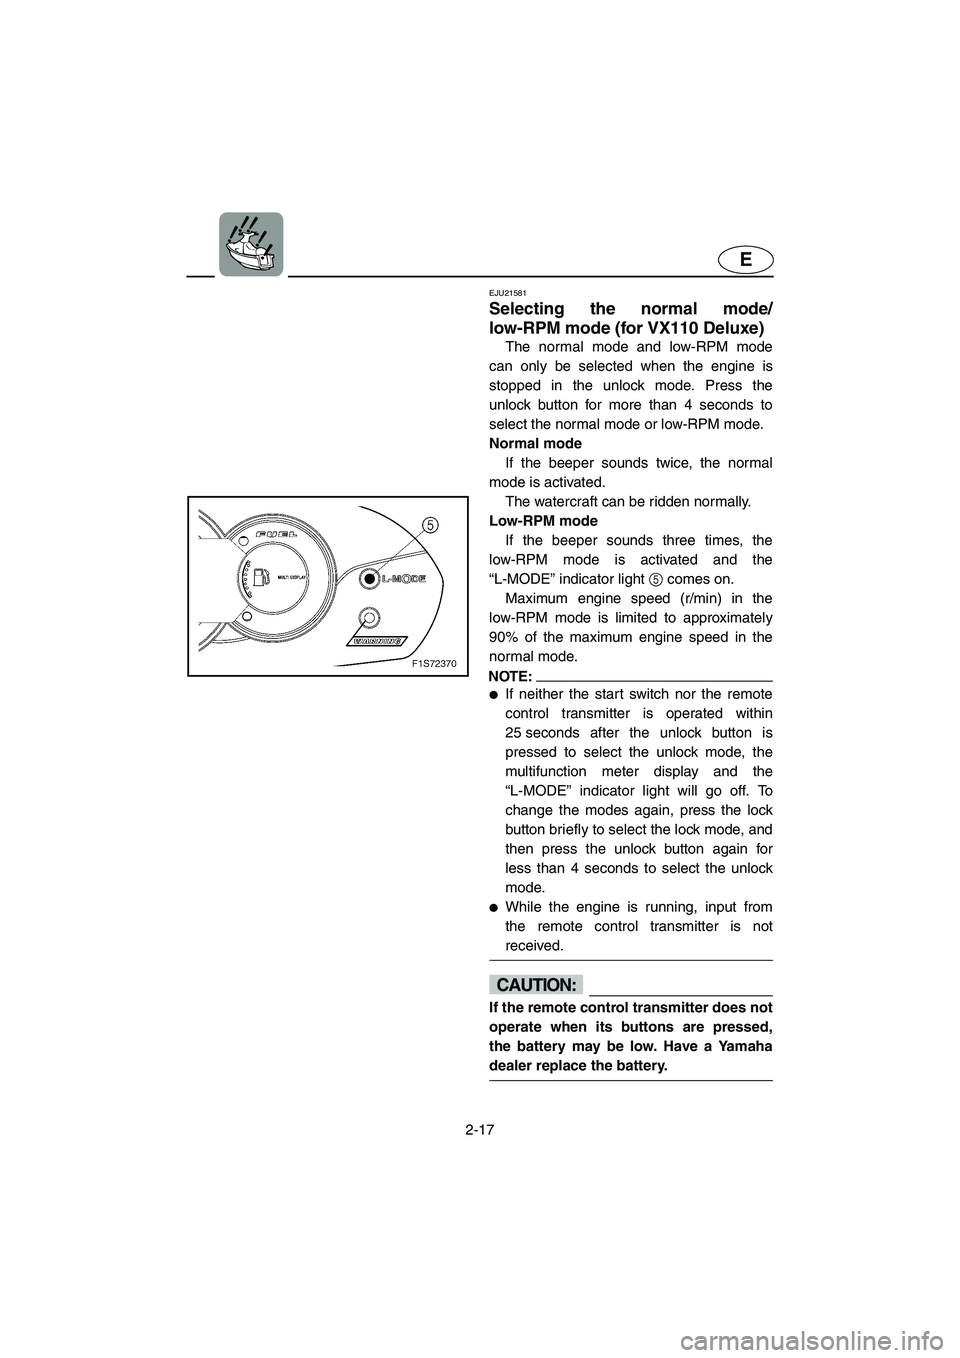 YAMAHA VX CRUISER 2005  Owners Manual 2-17
E
EJU21581 
Selecting the normal mode/
low-RPM mode (for VX110 Deluxe) 
The normal mode and low-RPM mode
can only be selected when the engine is
stopped in the unlock mode. Press the
unlock butto